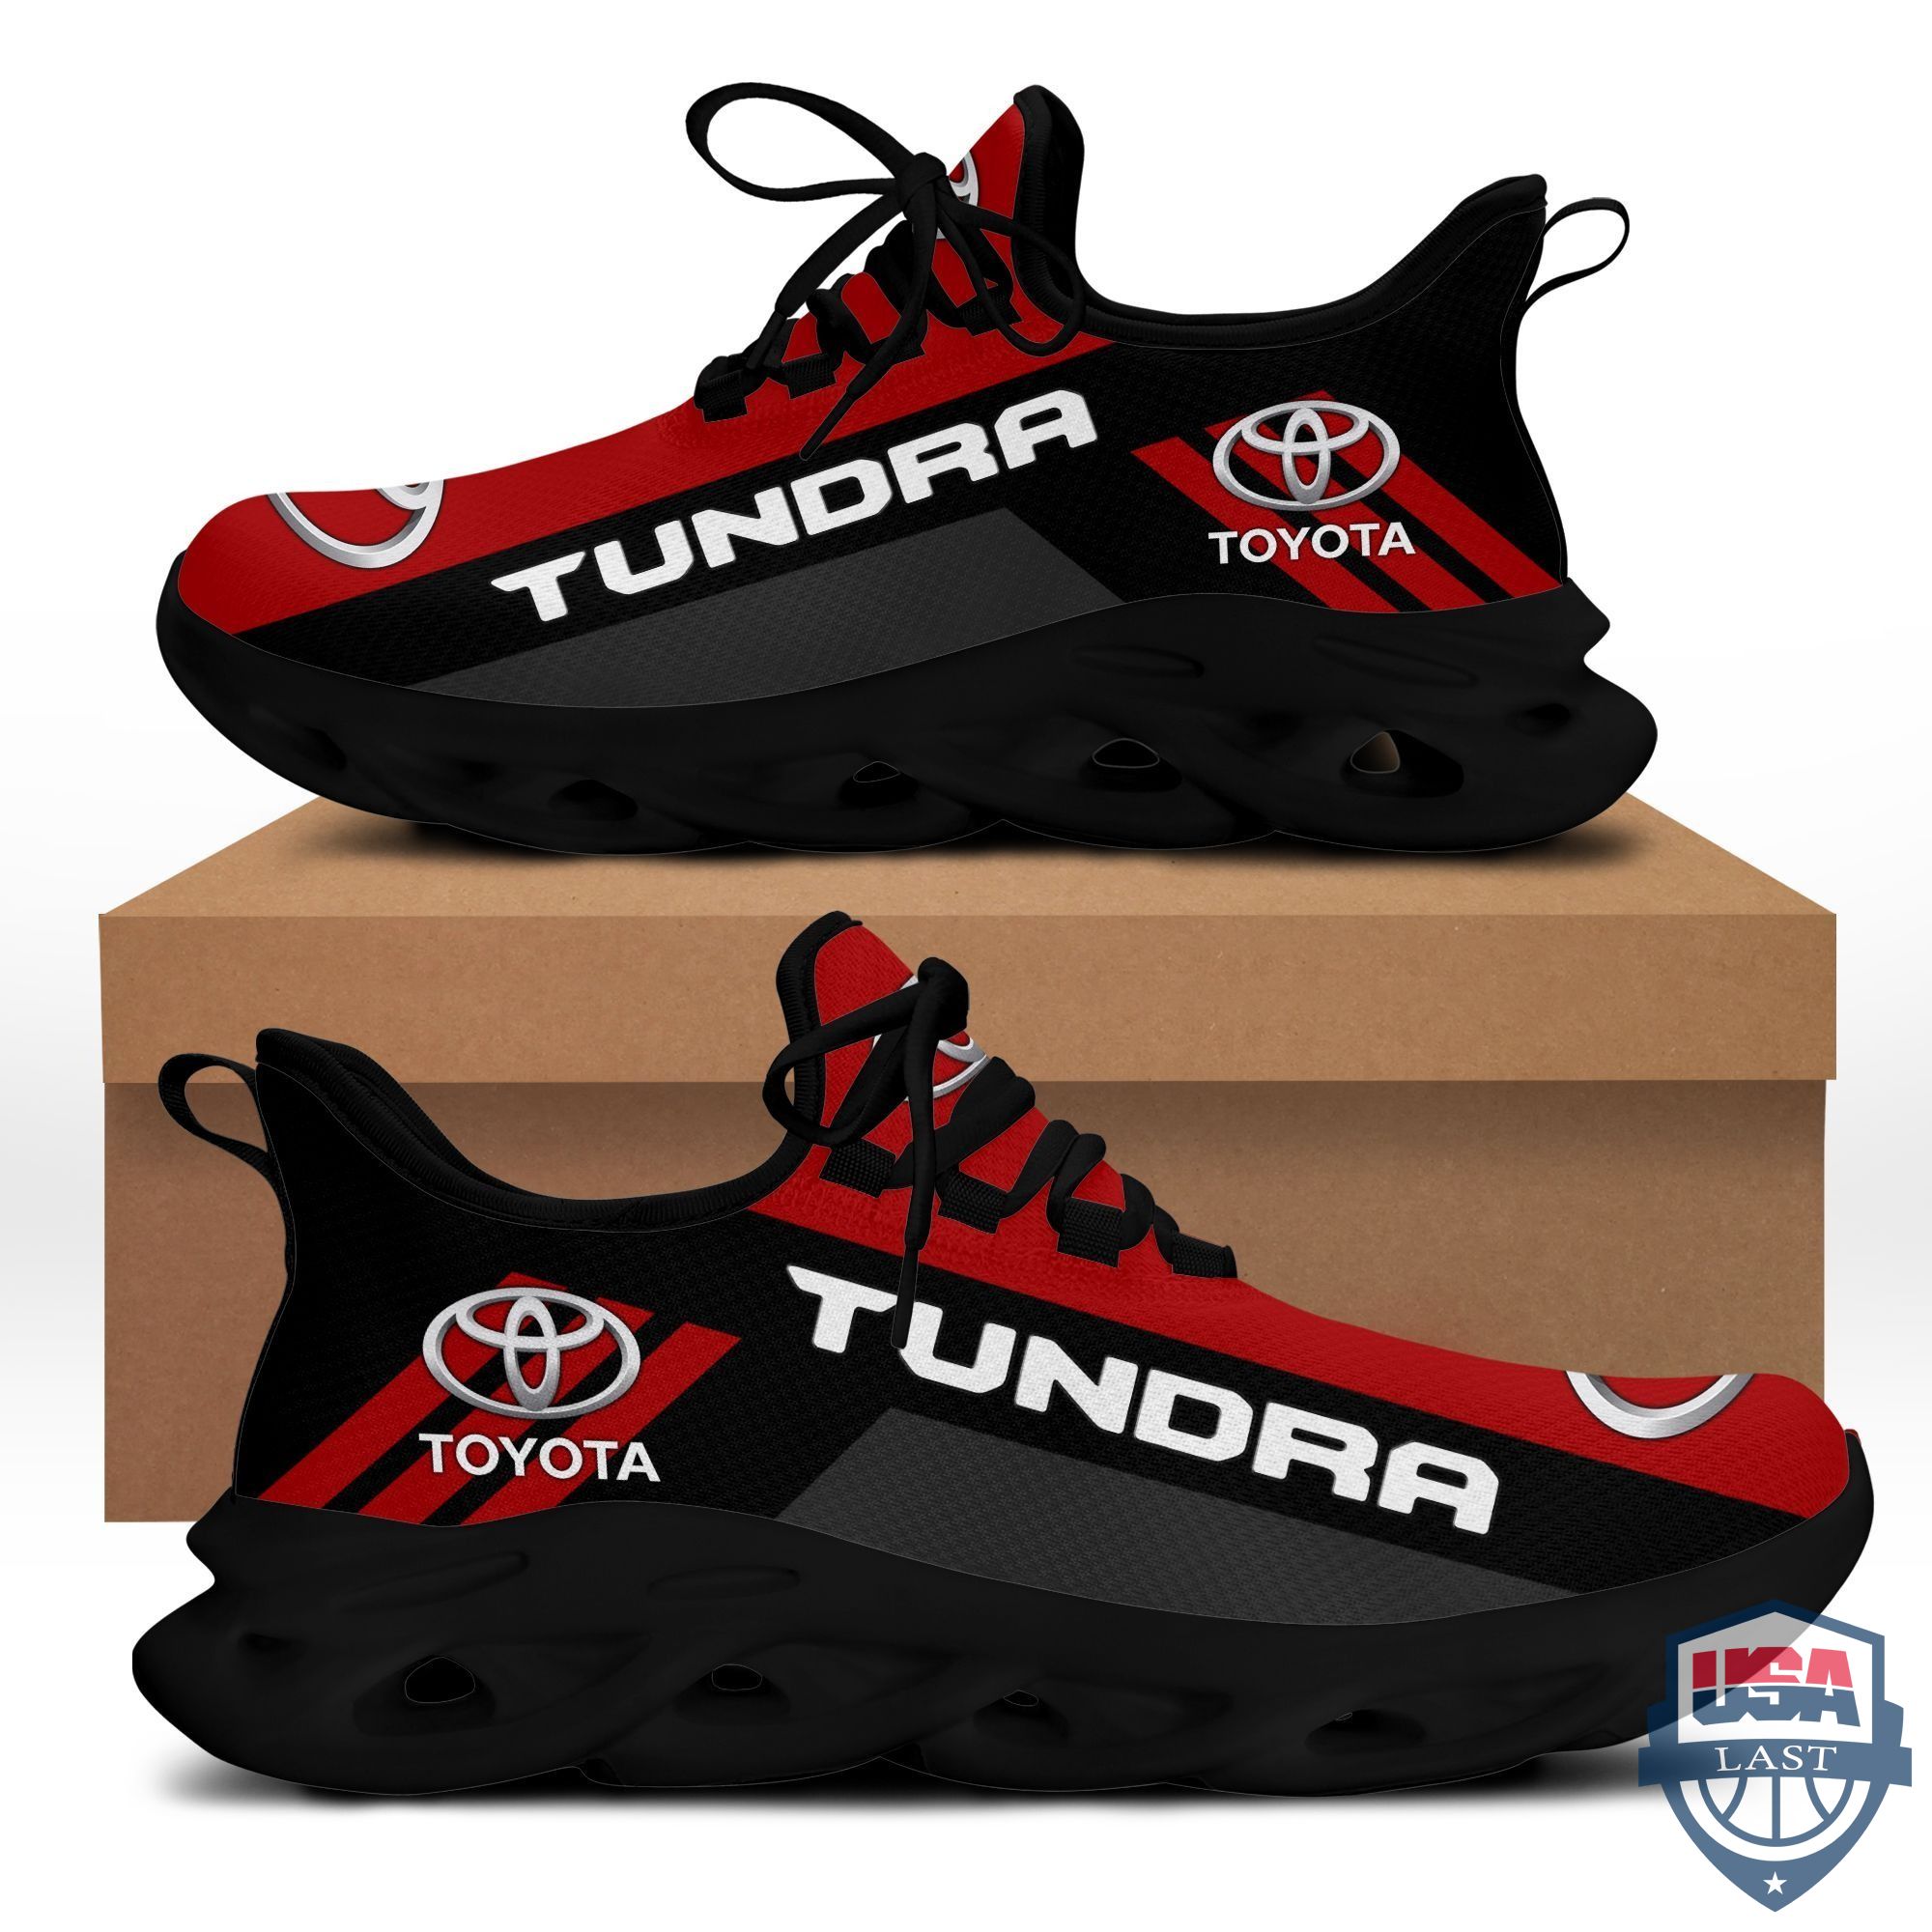 Toyota Tundra Running Shoes Red Version For Men, Women